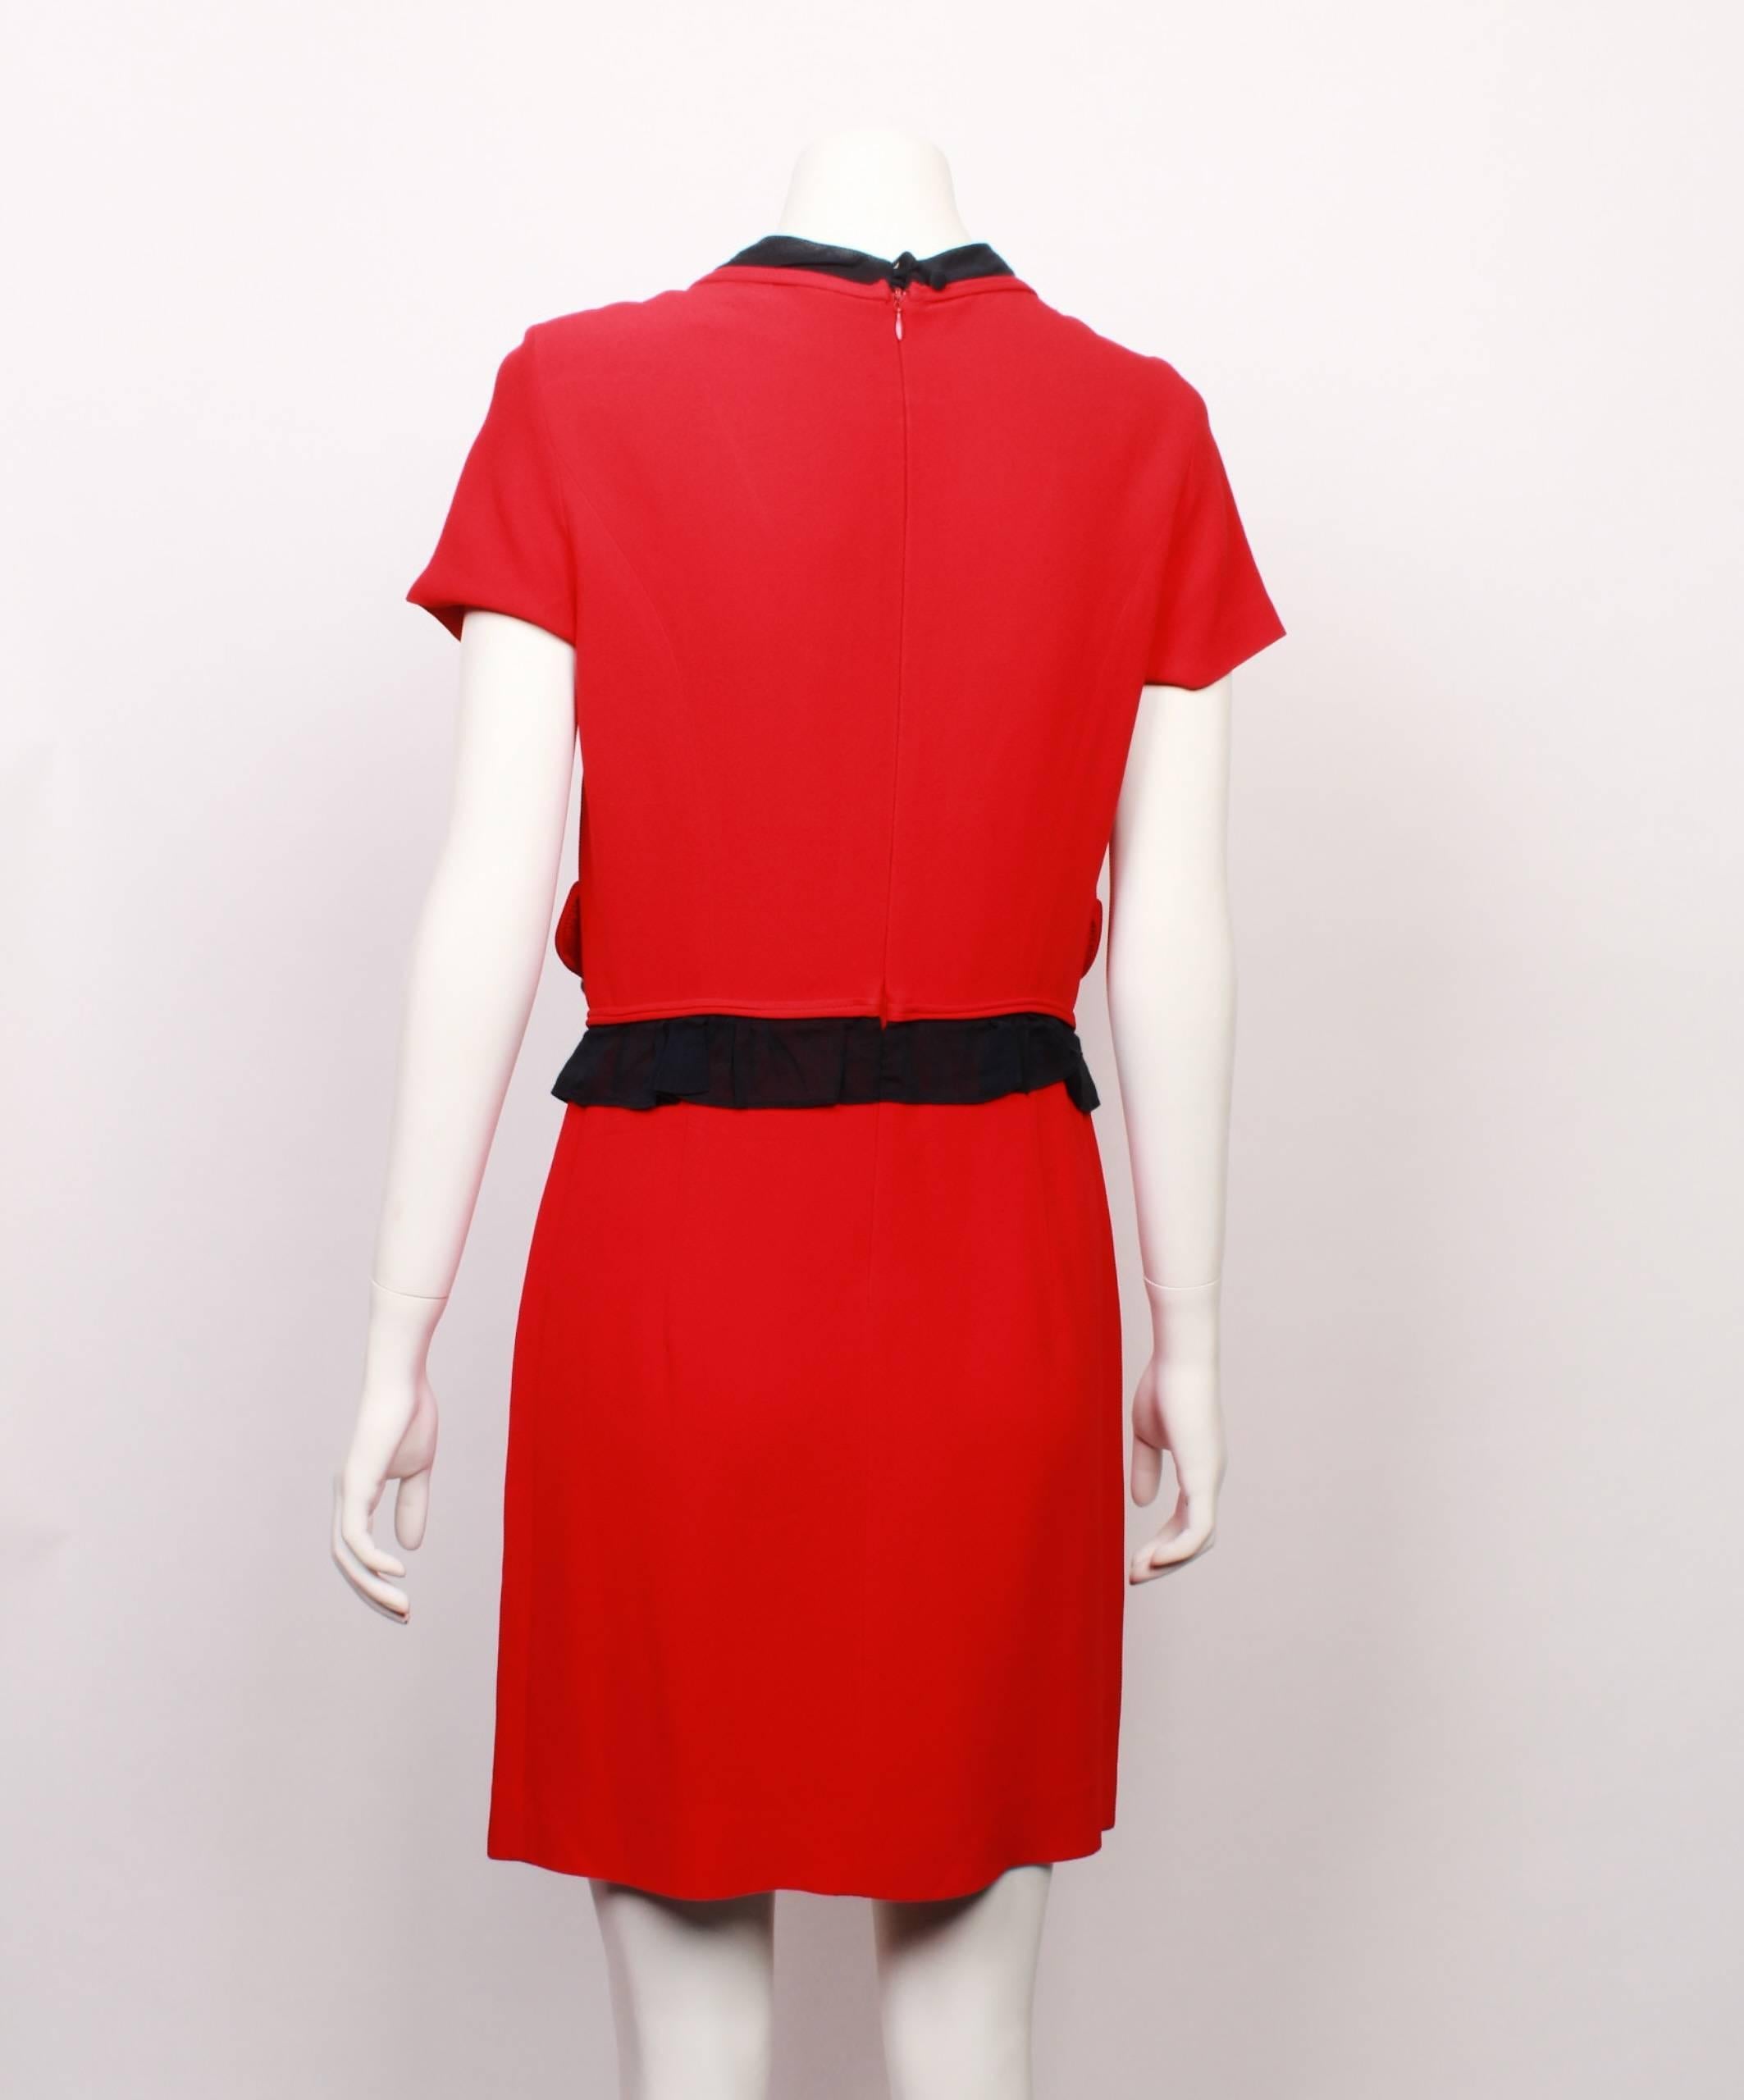 Women's Moschino Cheap and Chic Red and Black Dress For Sale